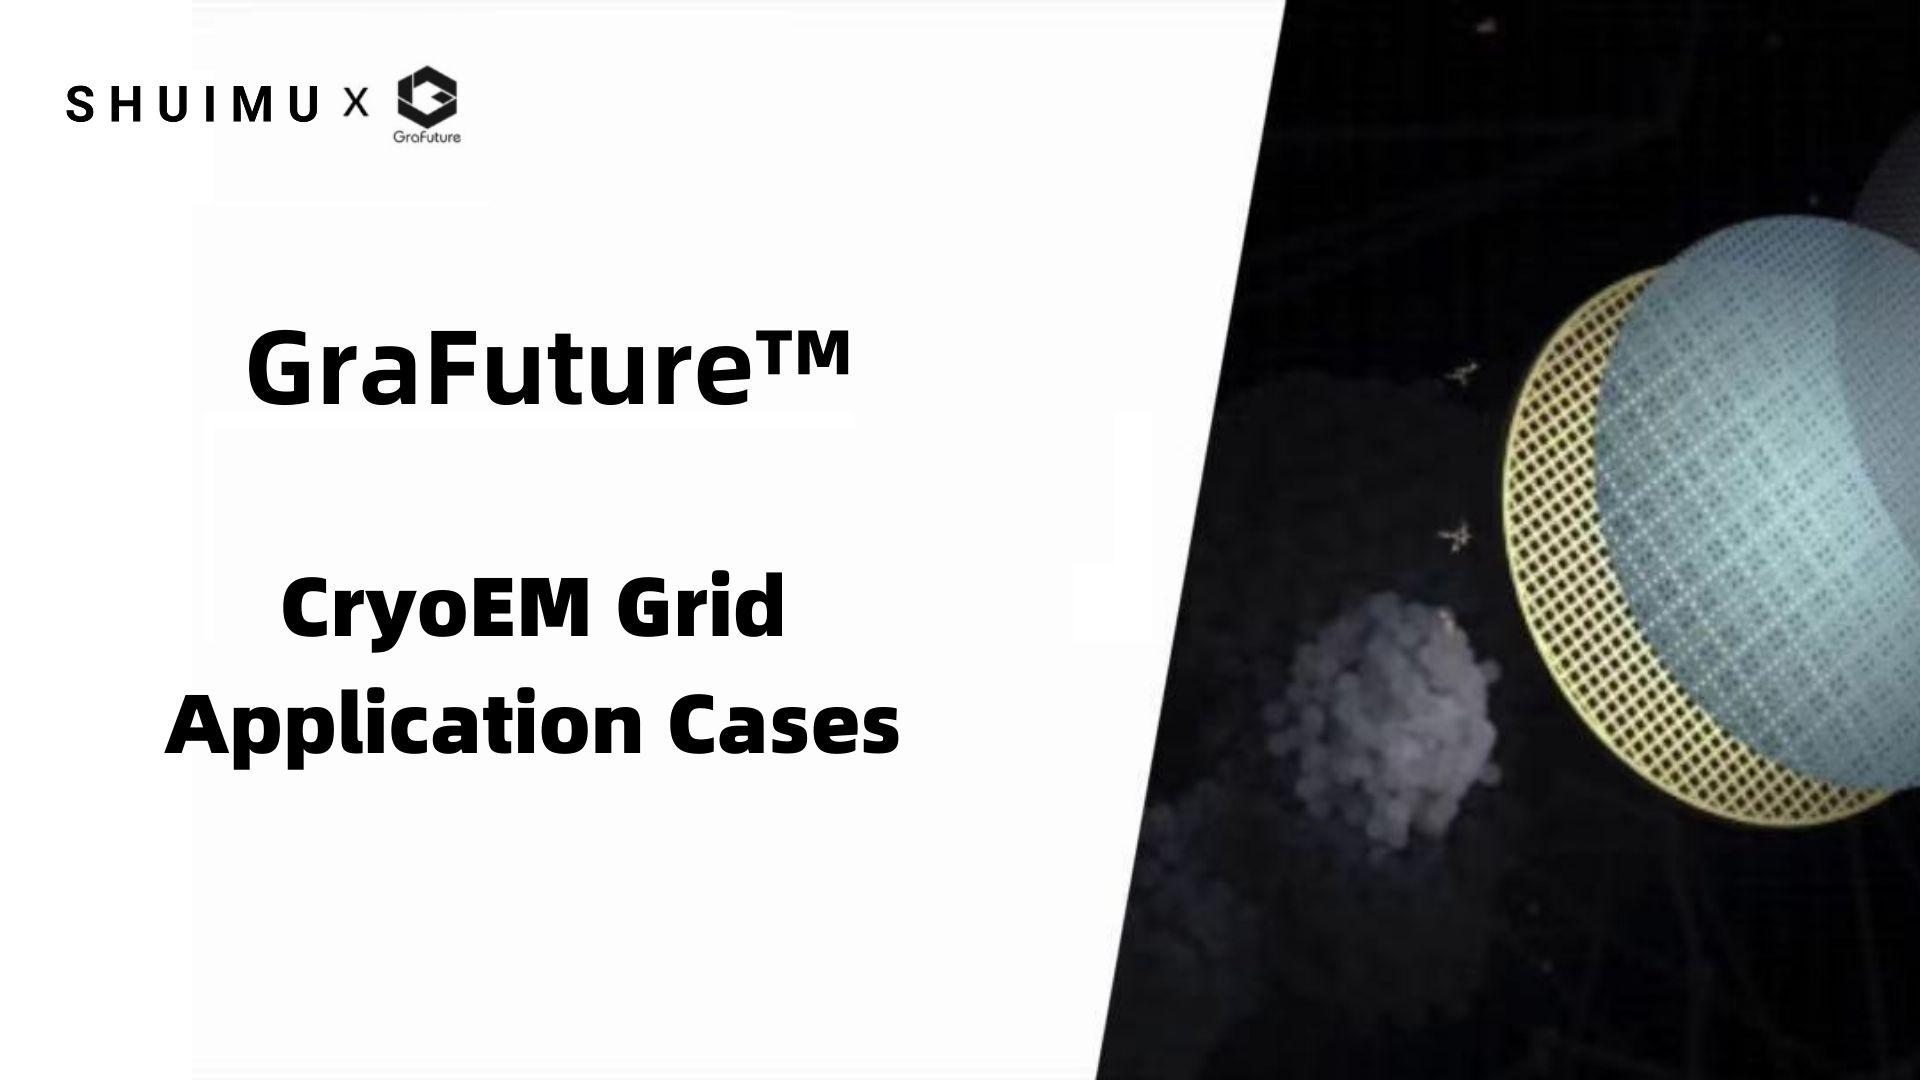 Application and examples of GraFuture™ cryo-EM grids